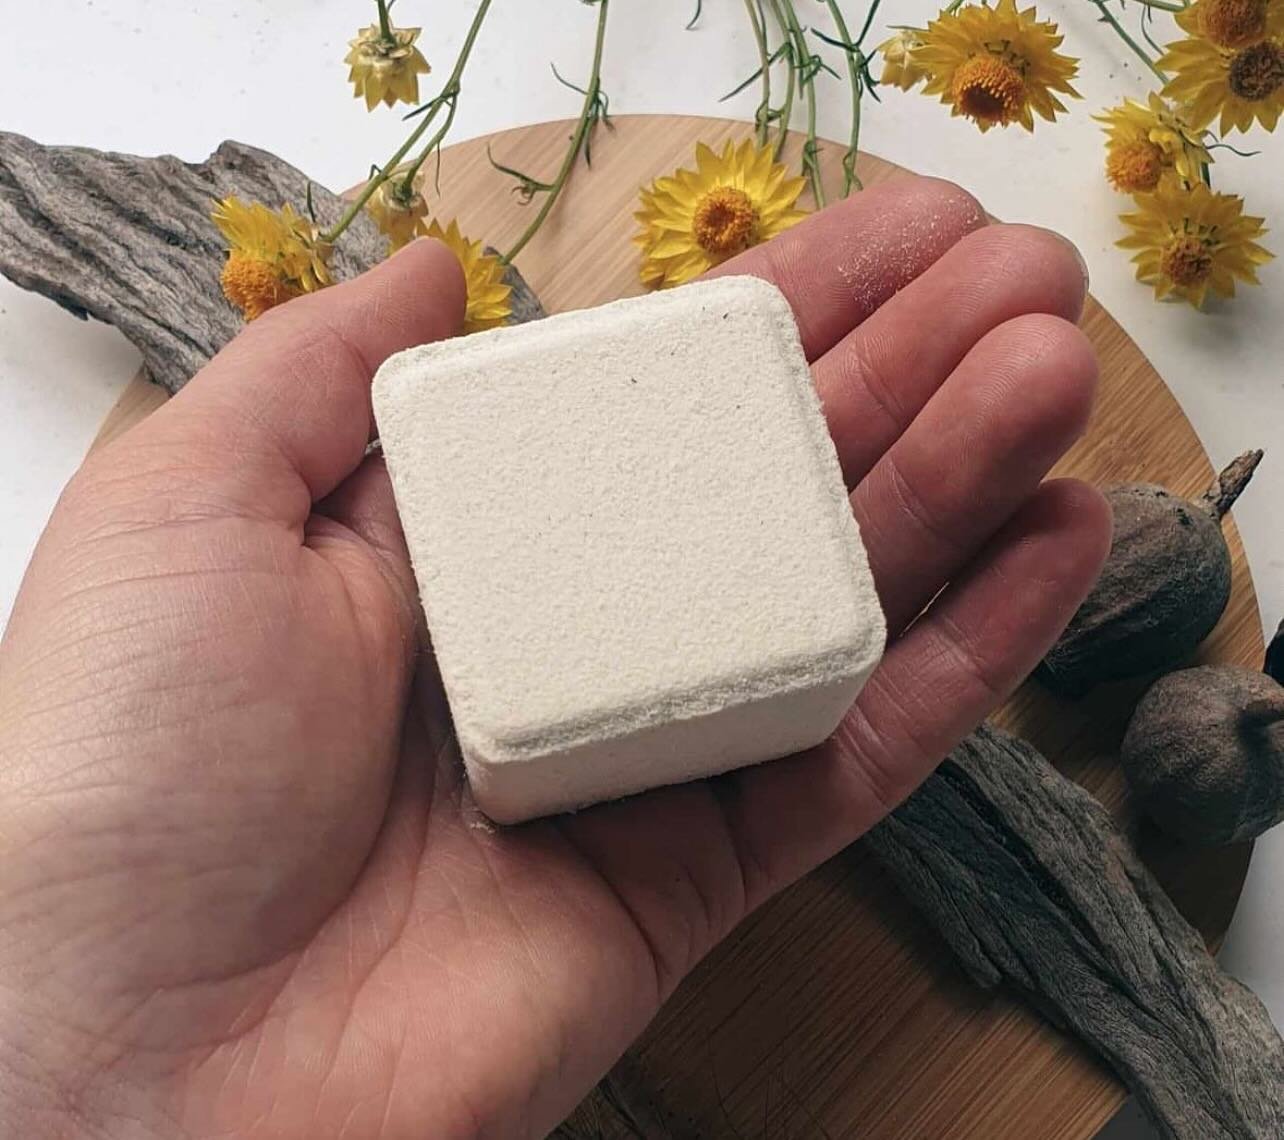 Elevate your day by indulging in a spa-like experience right at home with these delightful, devine shower steamers we love.

Wondering what a shower steamer is? Picture a bath bomb but for your shower.
It offers an essential oil-infused, refreshing a